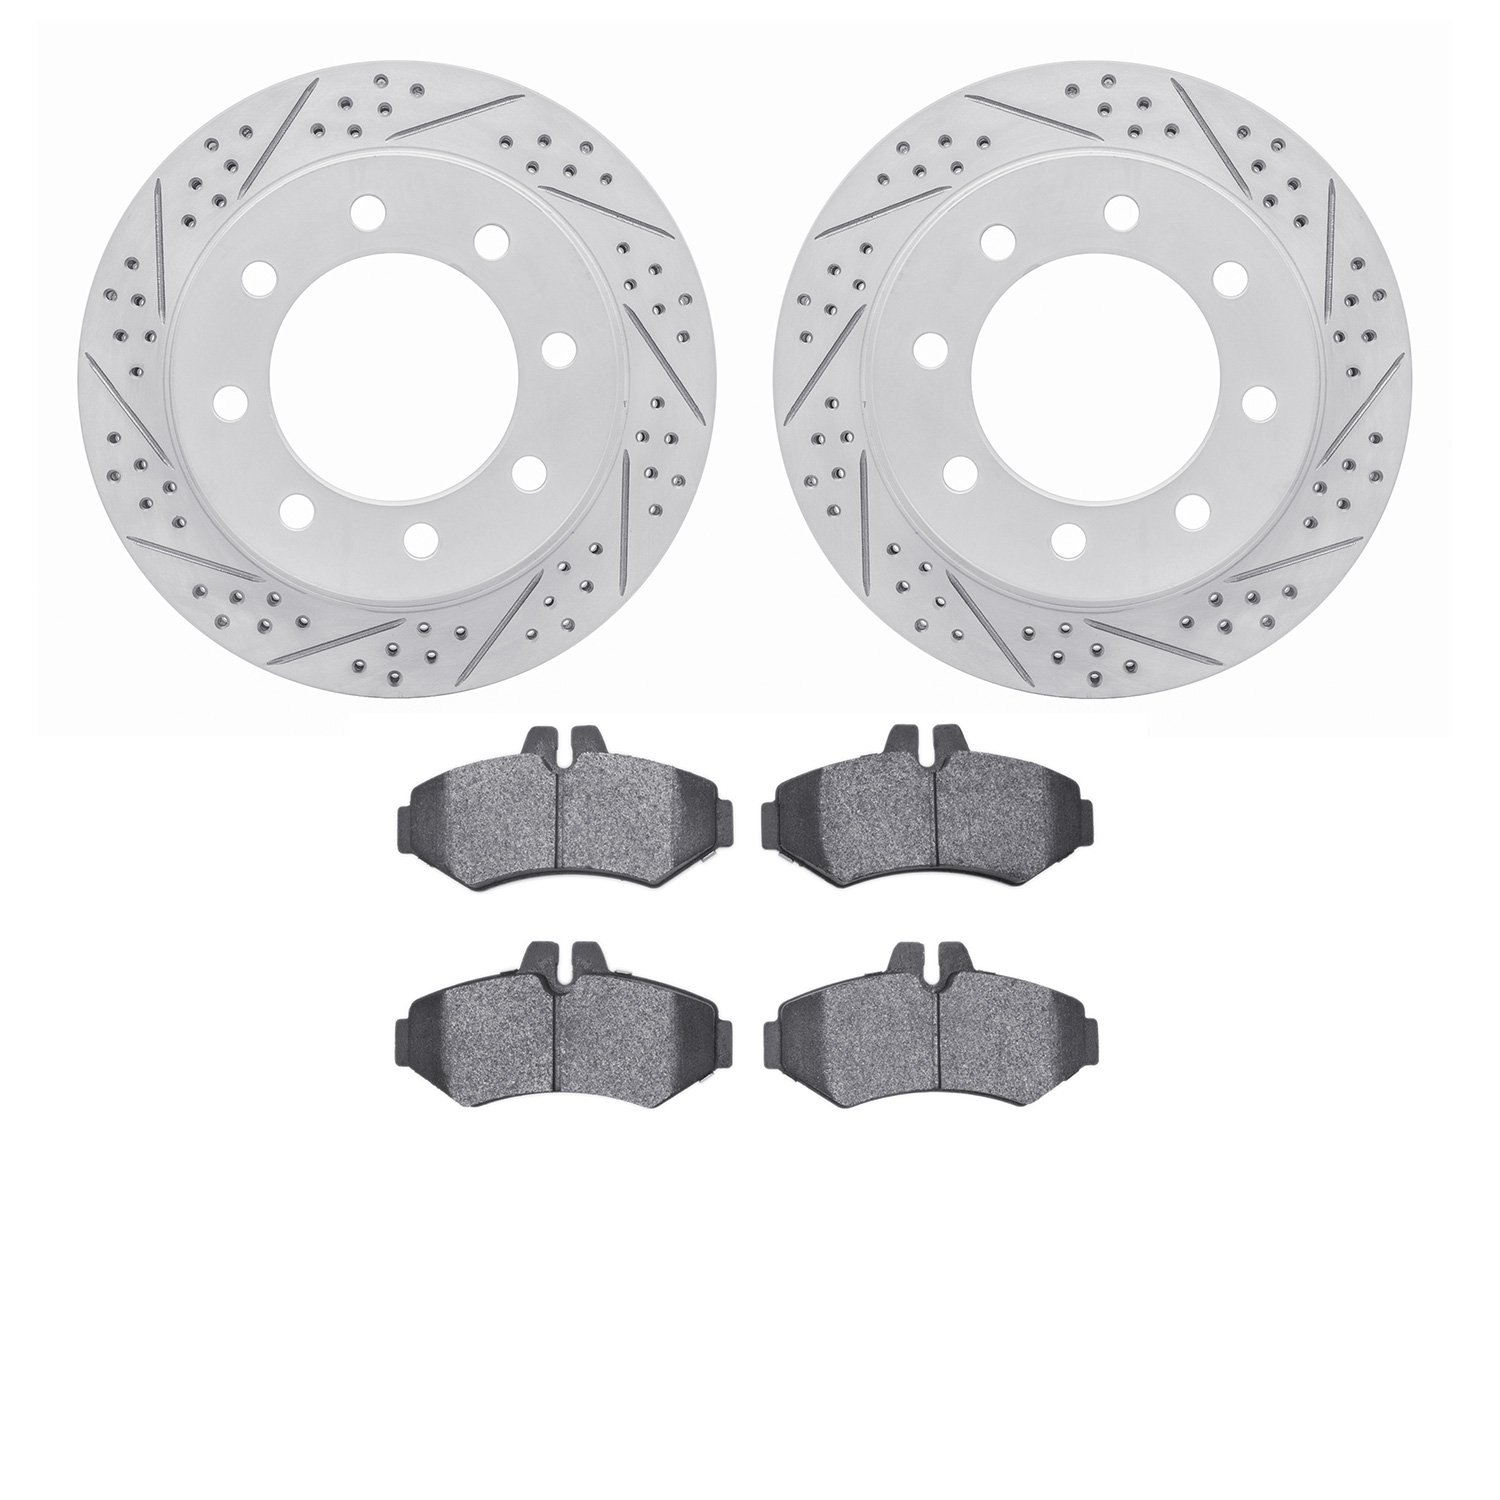 2202-40018 Geoperformance Drilled/Slotted Rotors w/Heavy-Duty Pads Kit, 2002-2018 Multiple Makes/Models, Position: Rear